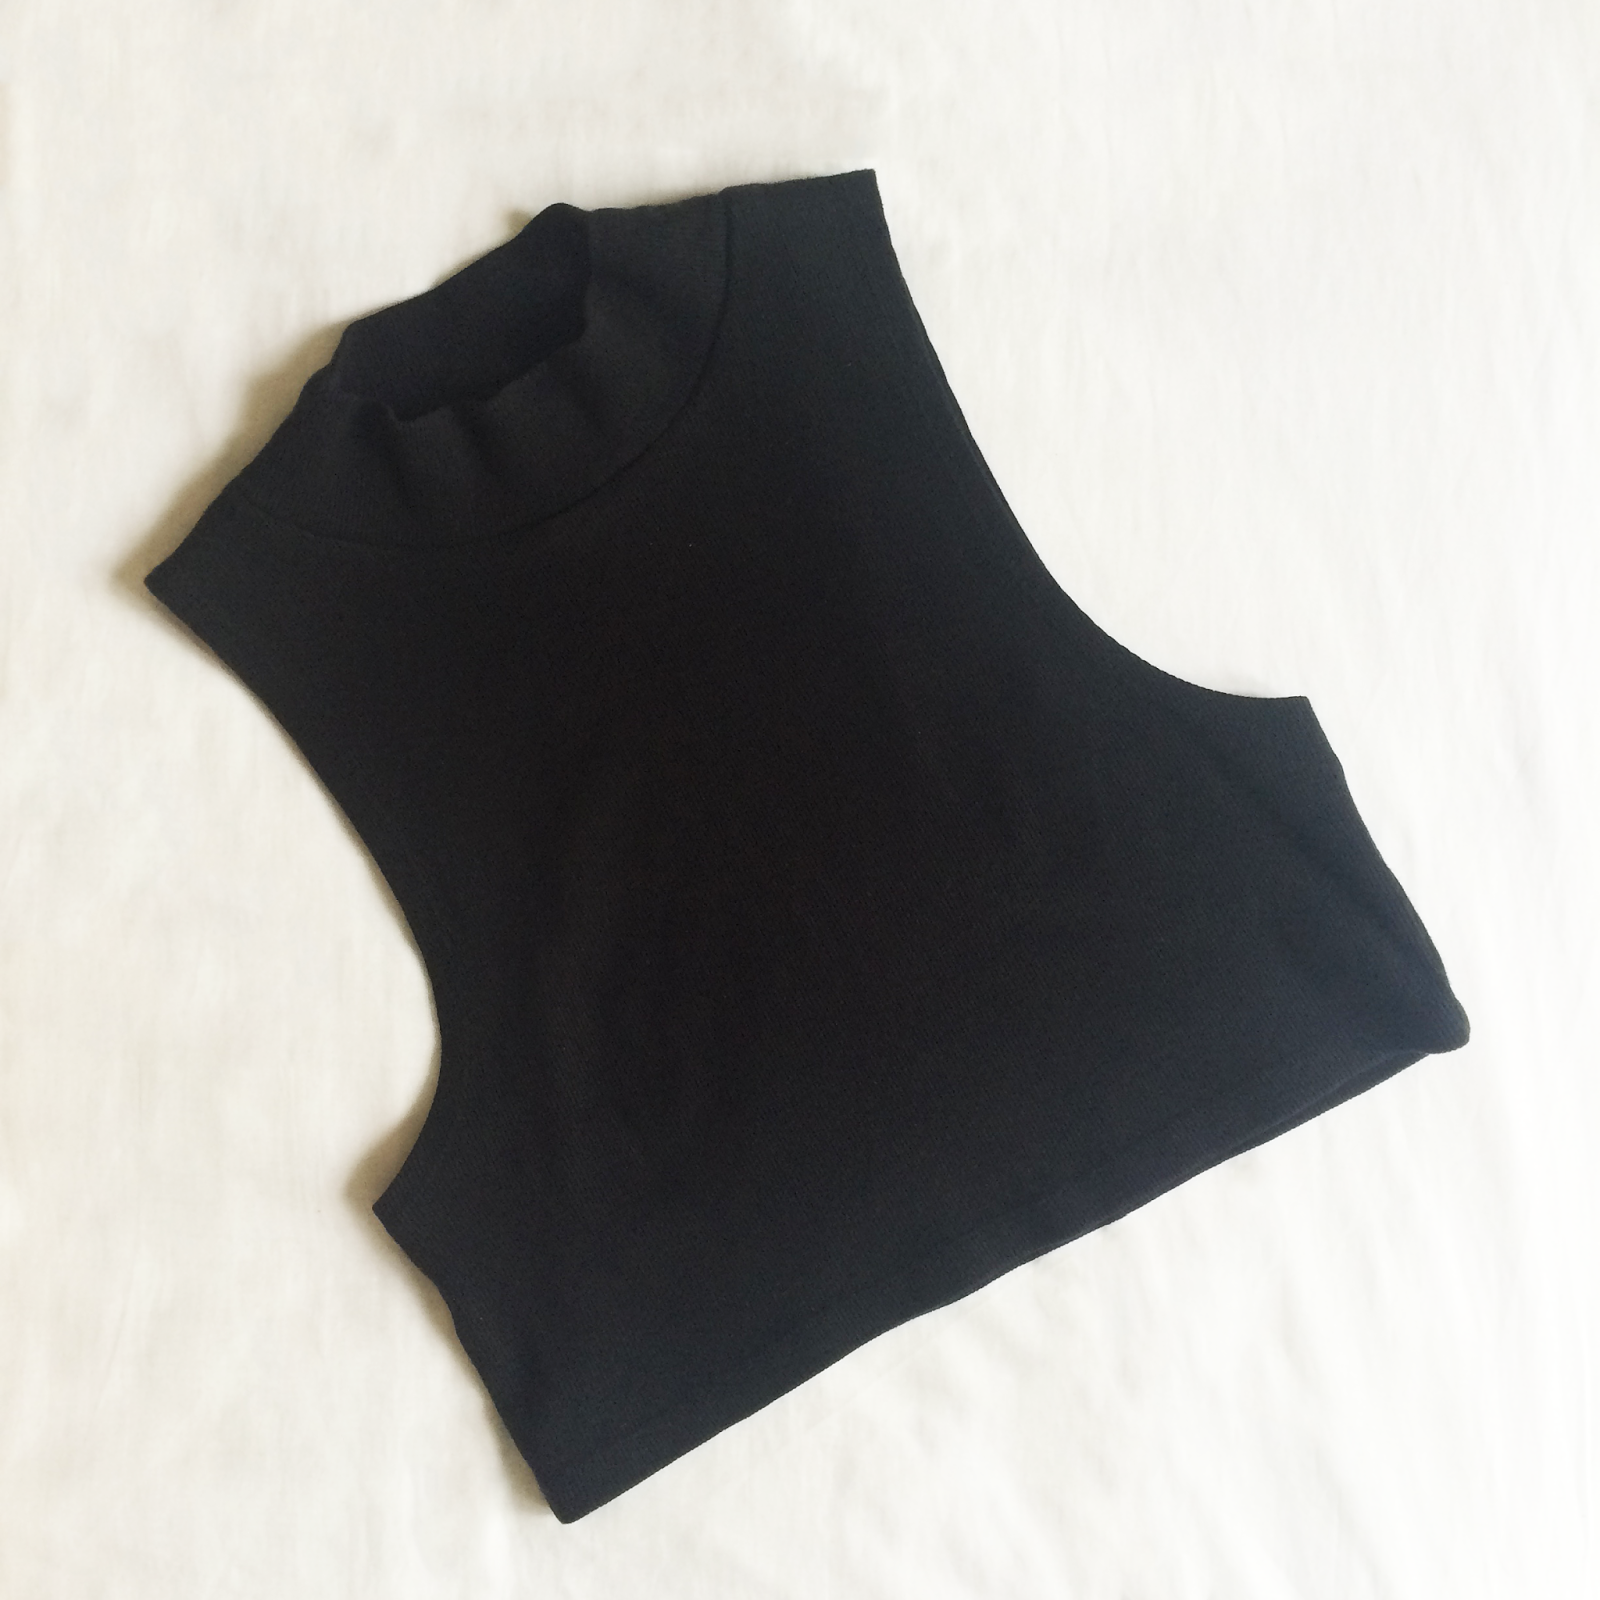 urban outfitters ribbed black poloneck crop top sleeveless fashion flat lay